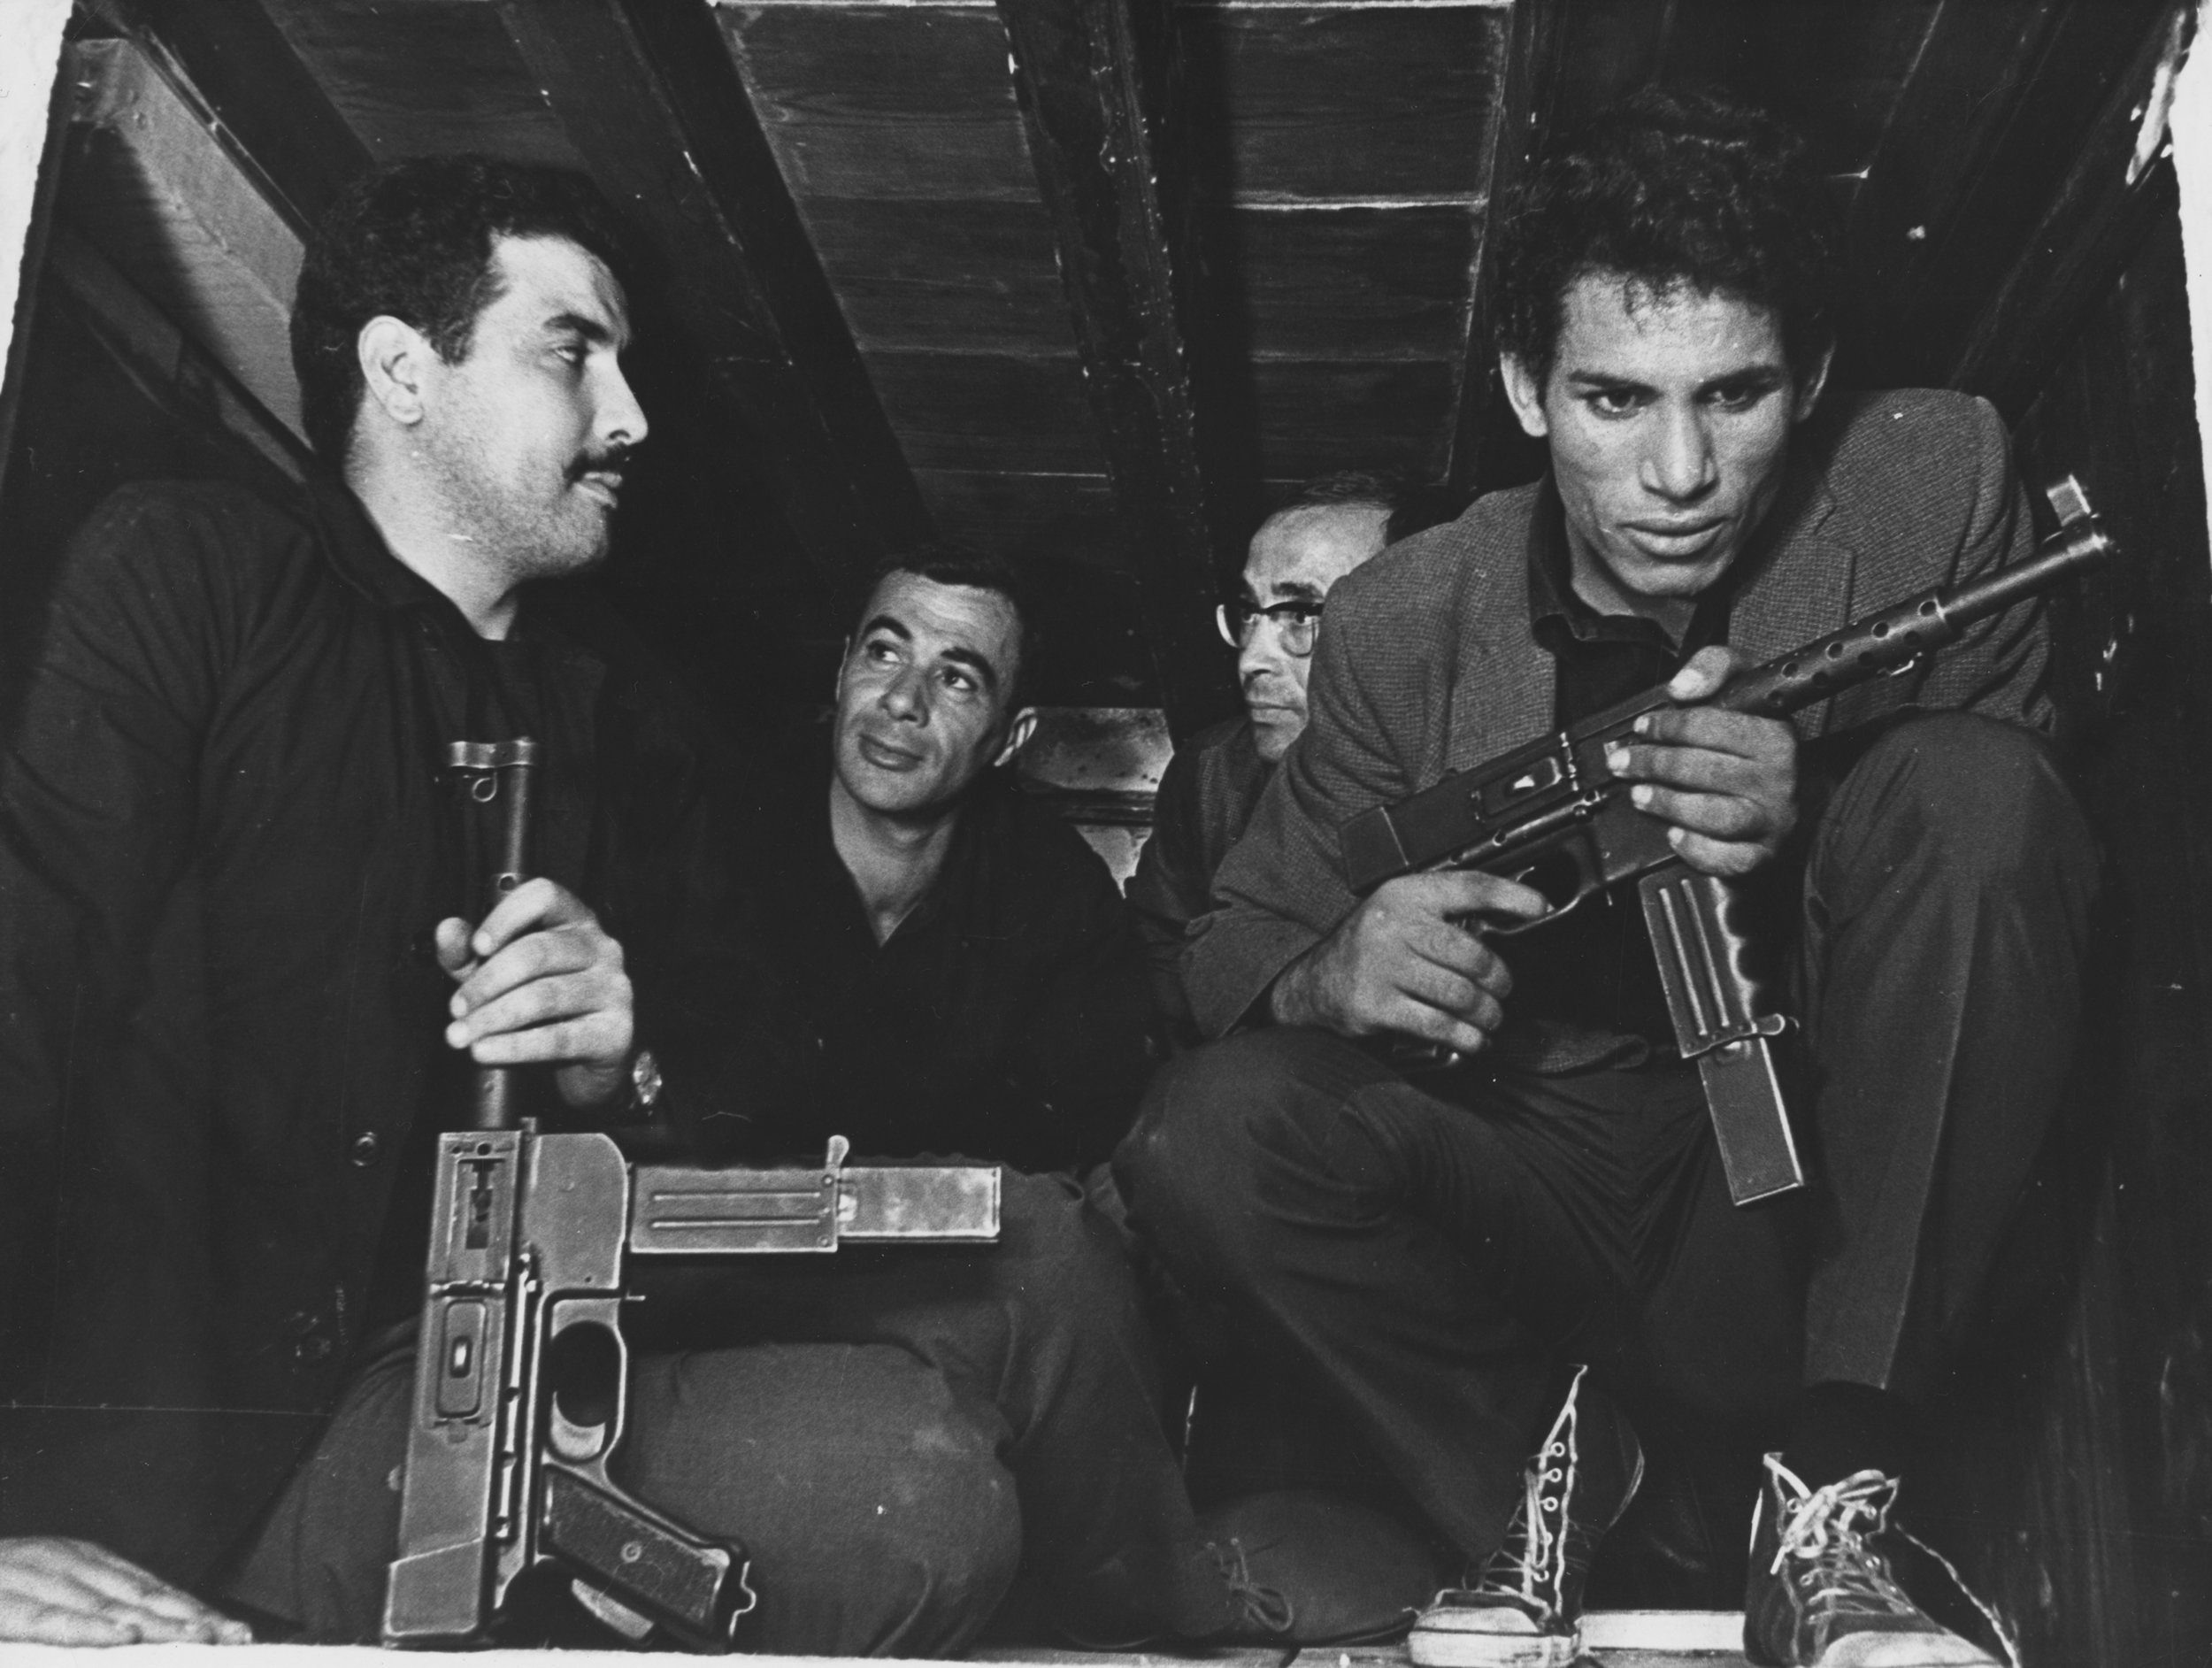  Stills from  The Battle of Algiers  